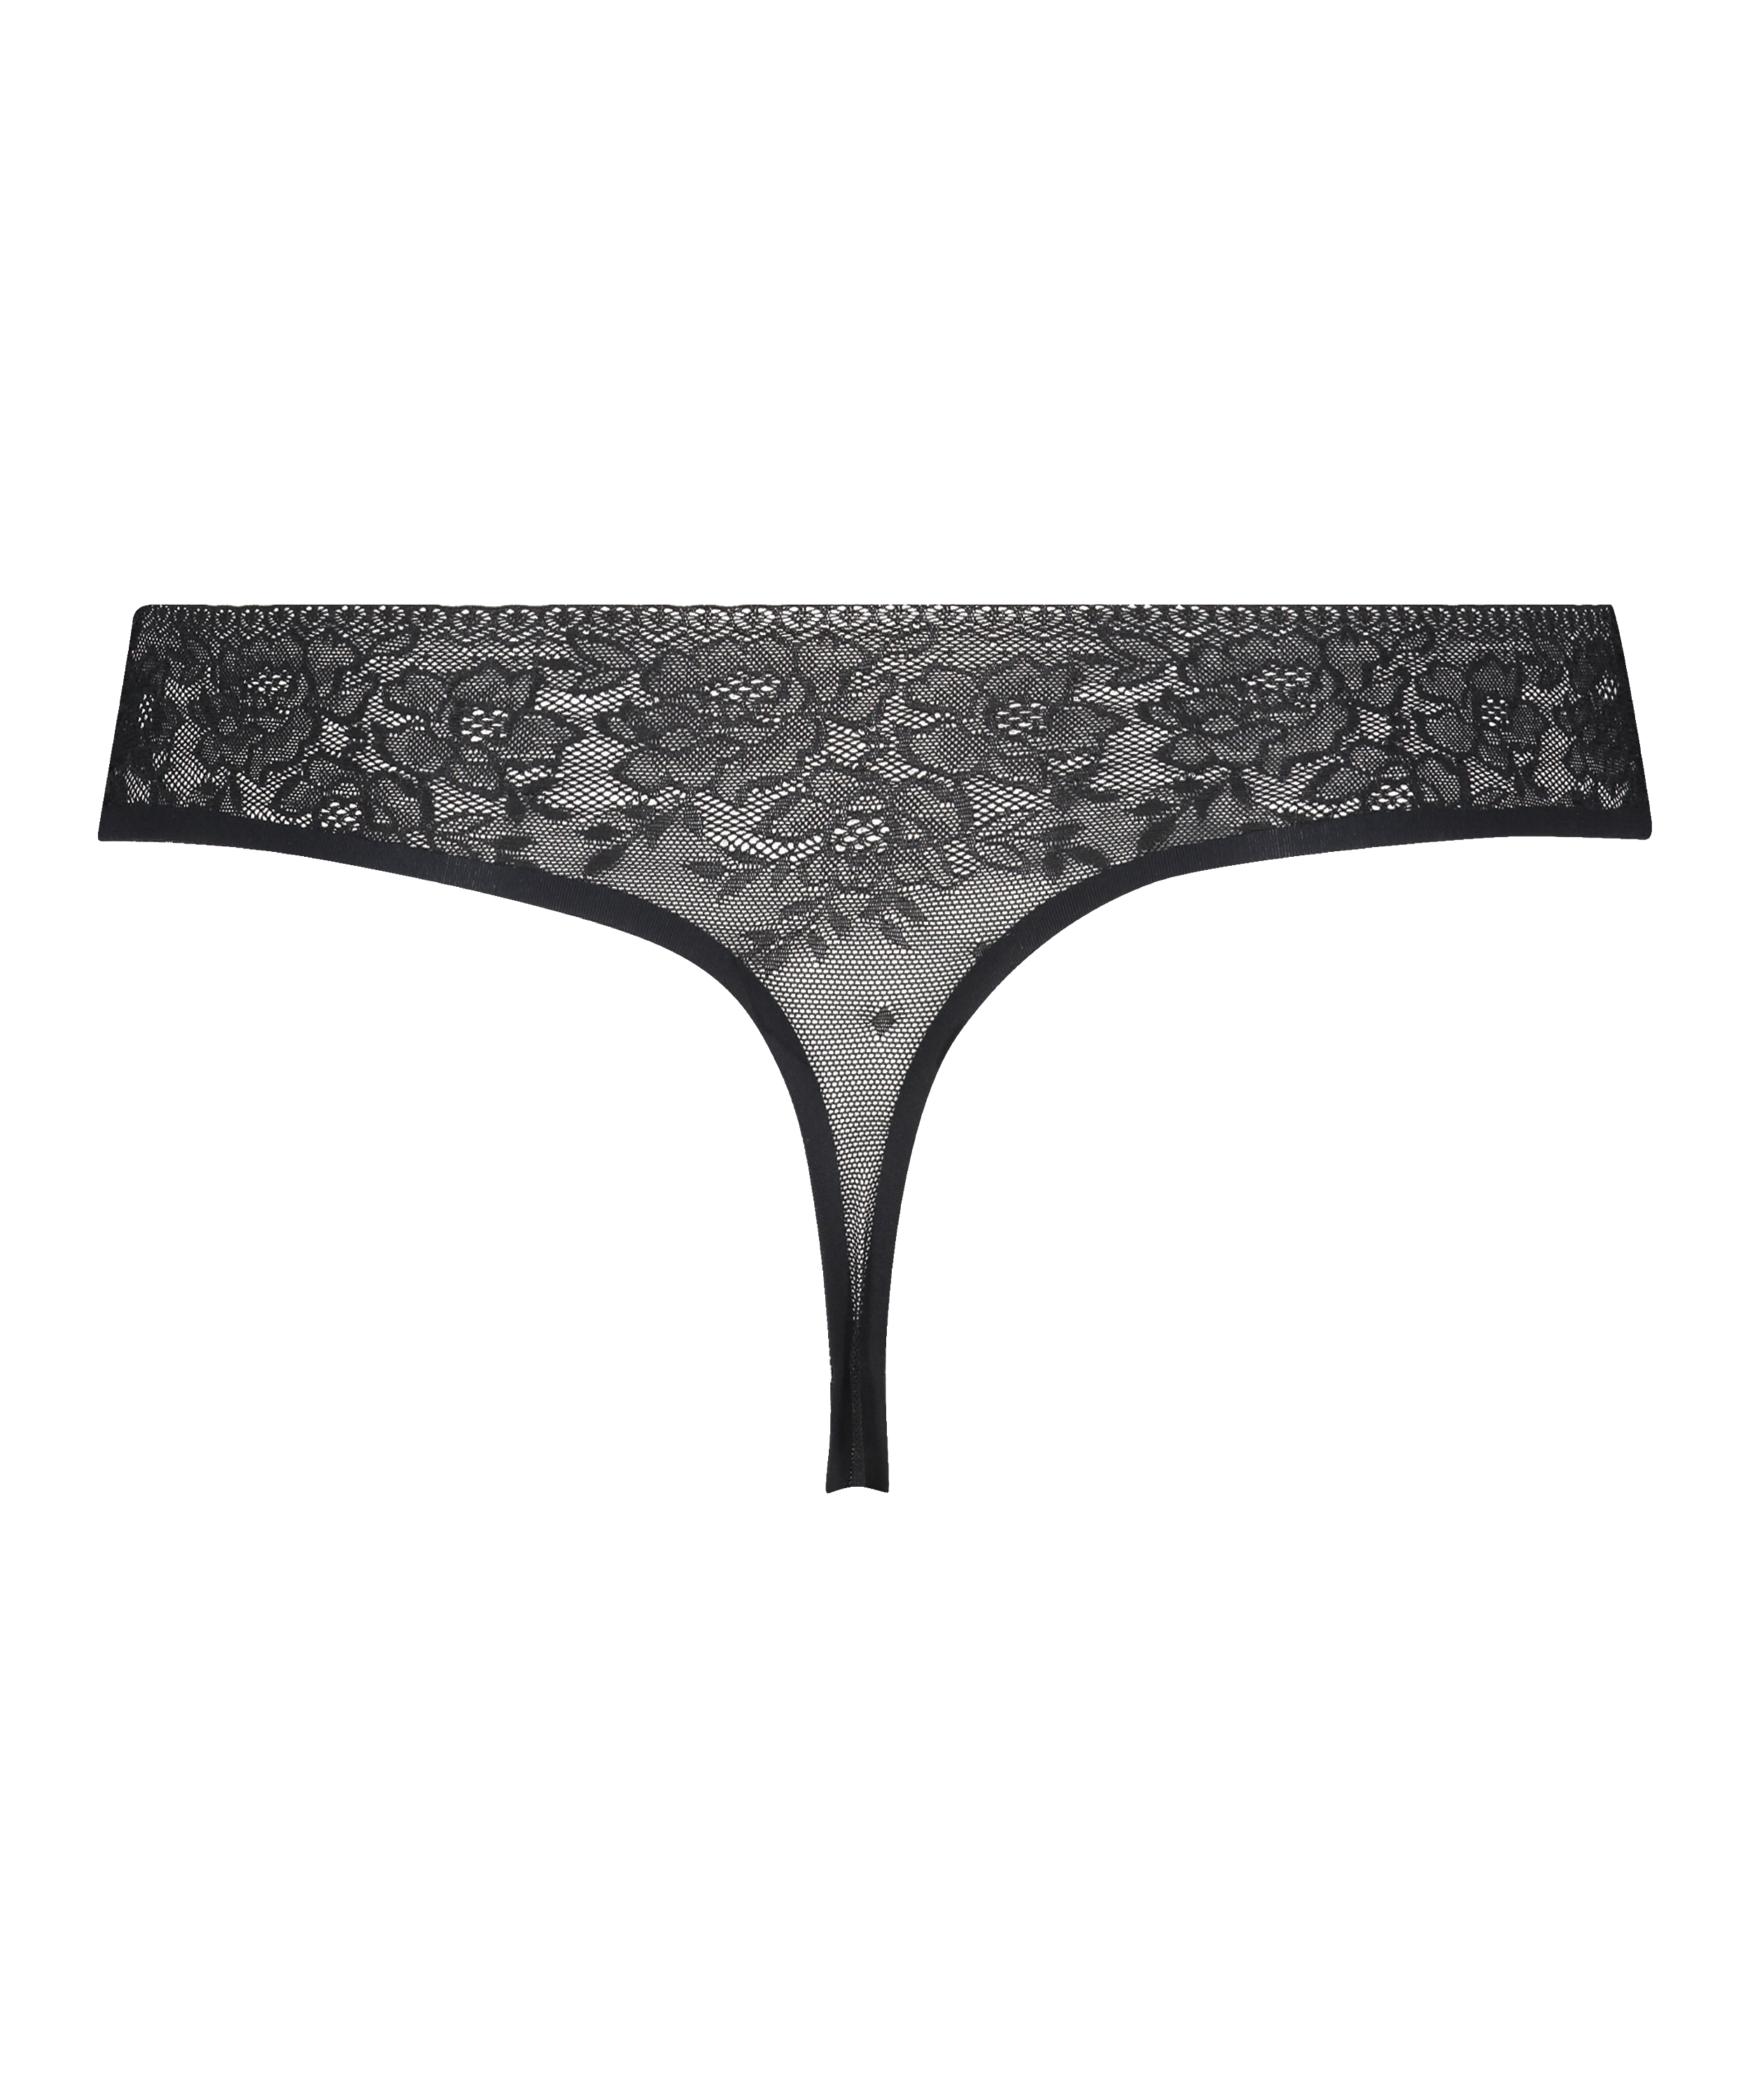 Allover Lace Invisible thong, Black, main